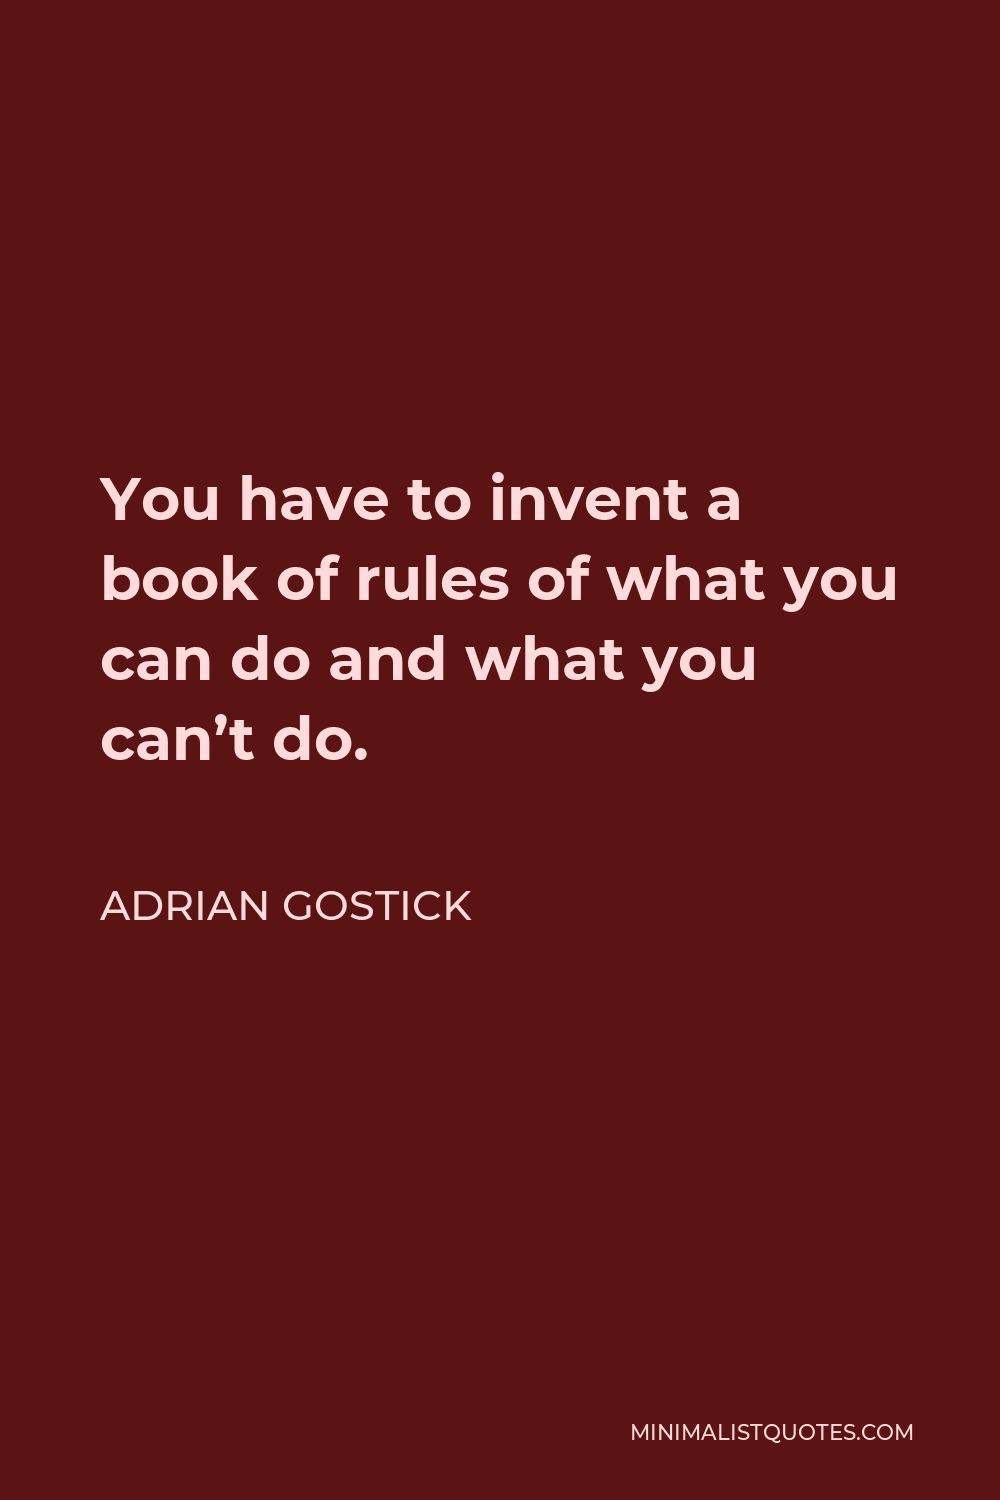 Adrian Gostick Quote - You have to invent a book of rules of what you can do and what you can’t do.